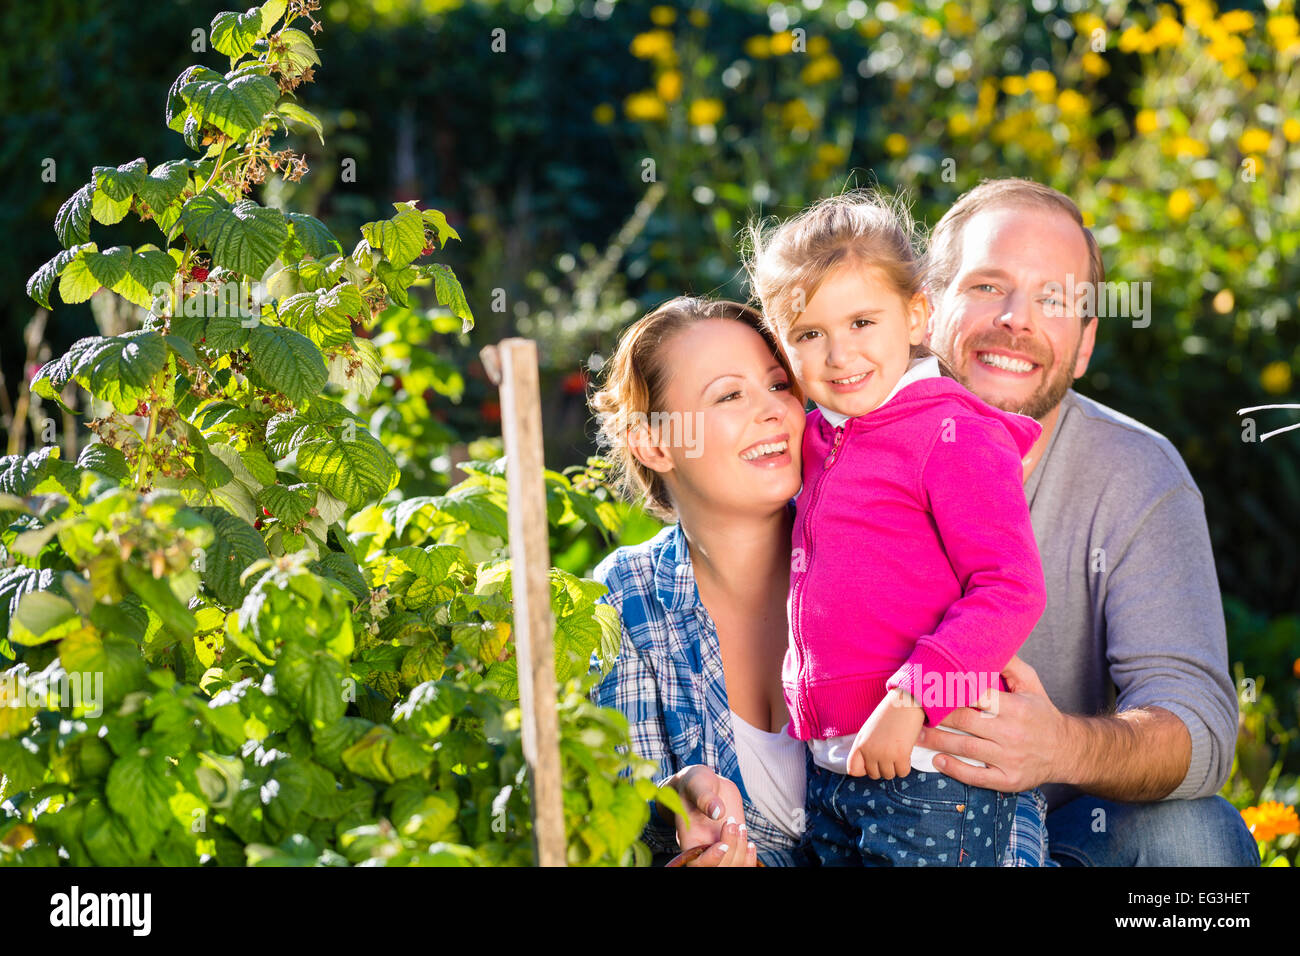 Mother, father and daughter in garden with basket Stock Photo